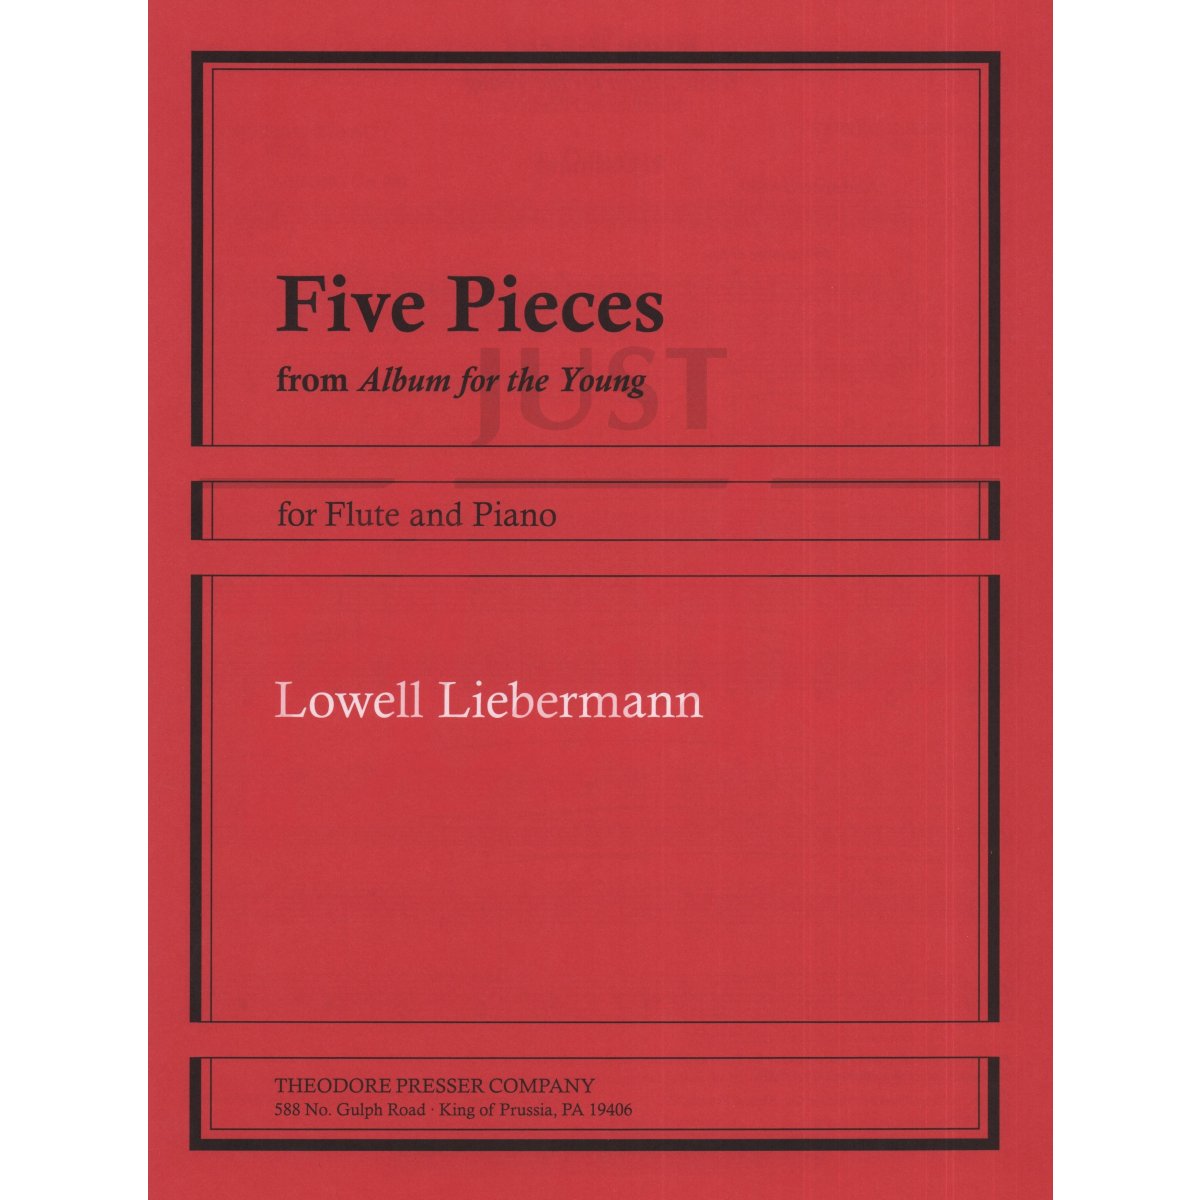 Five Pieces from Album for the Young for Flute and Piano